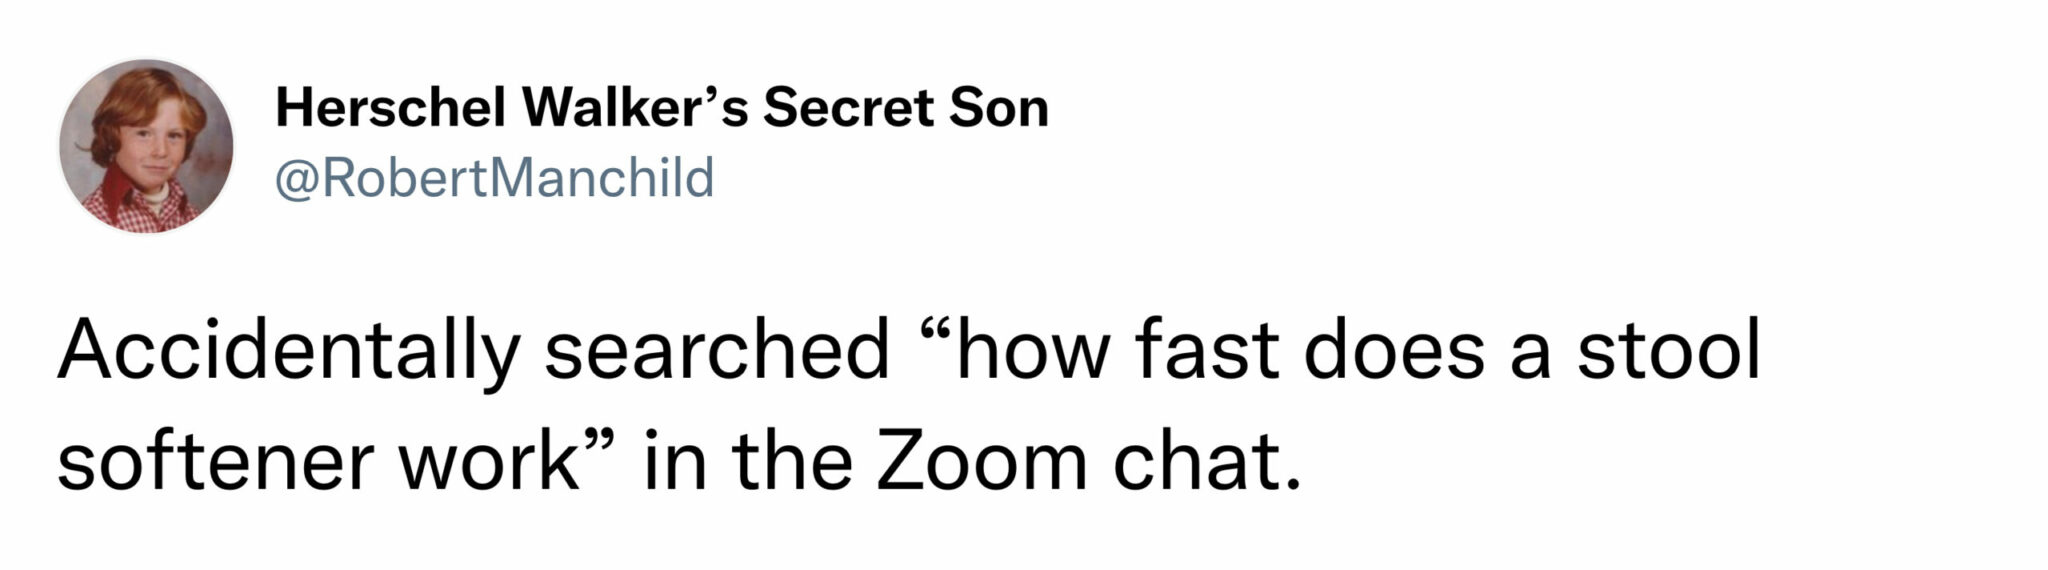 tweet about zoom chat awkward comments